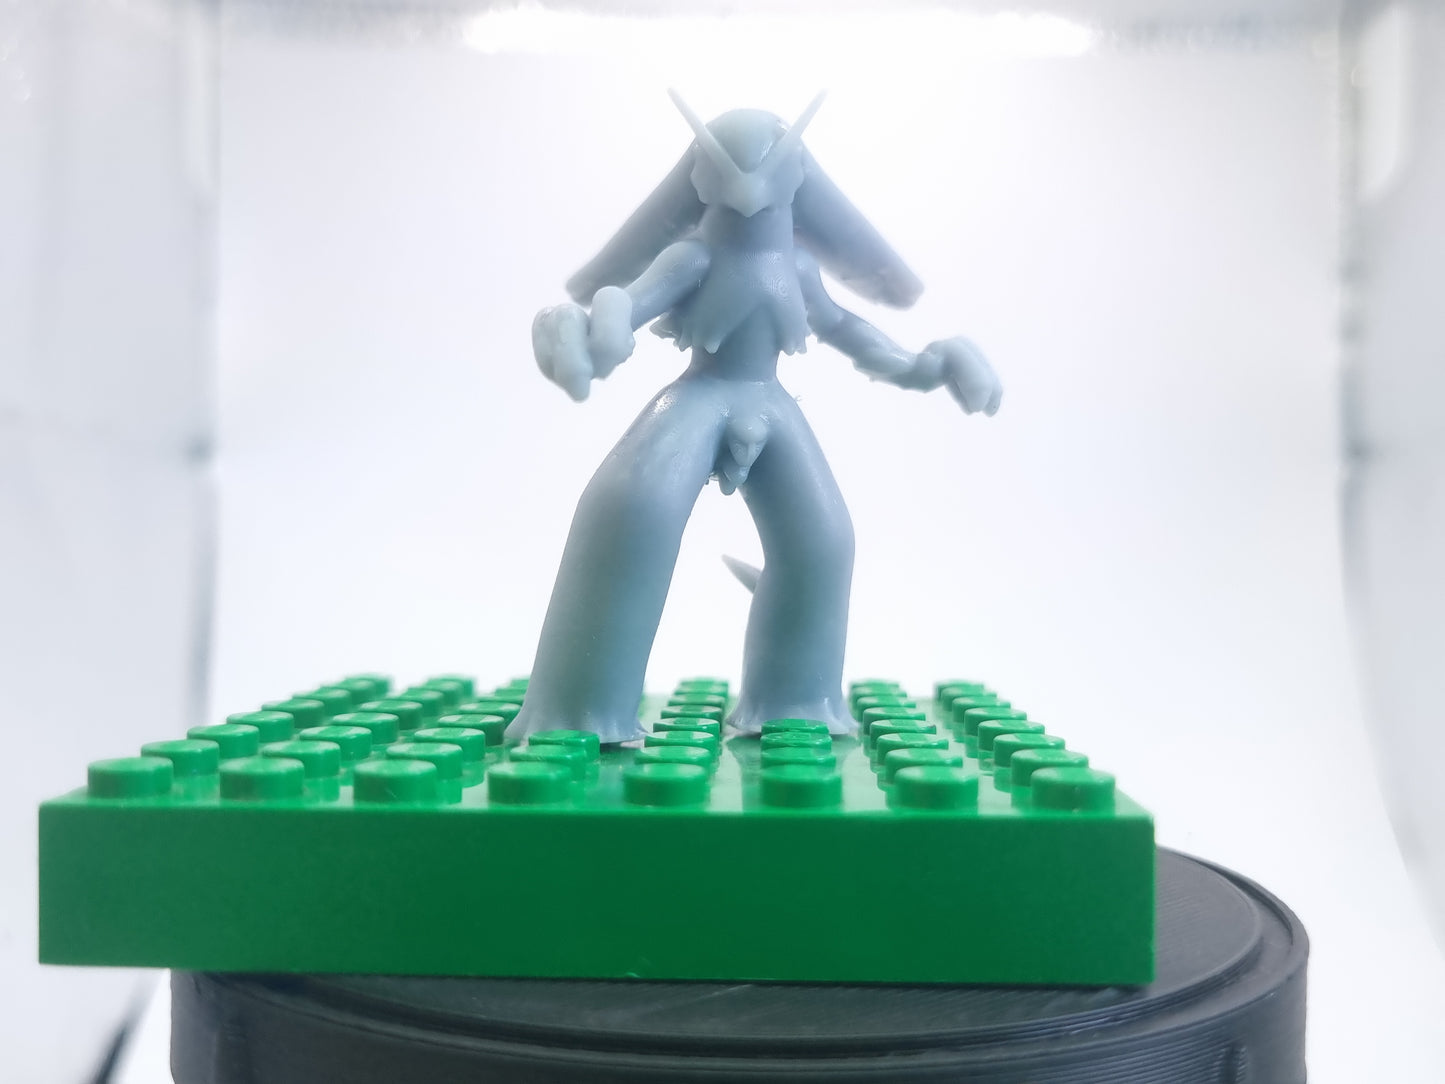 Lego compatible 3D printed custom fighter figure!